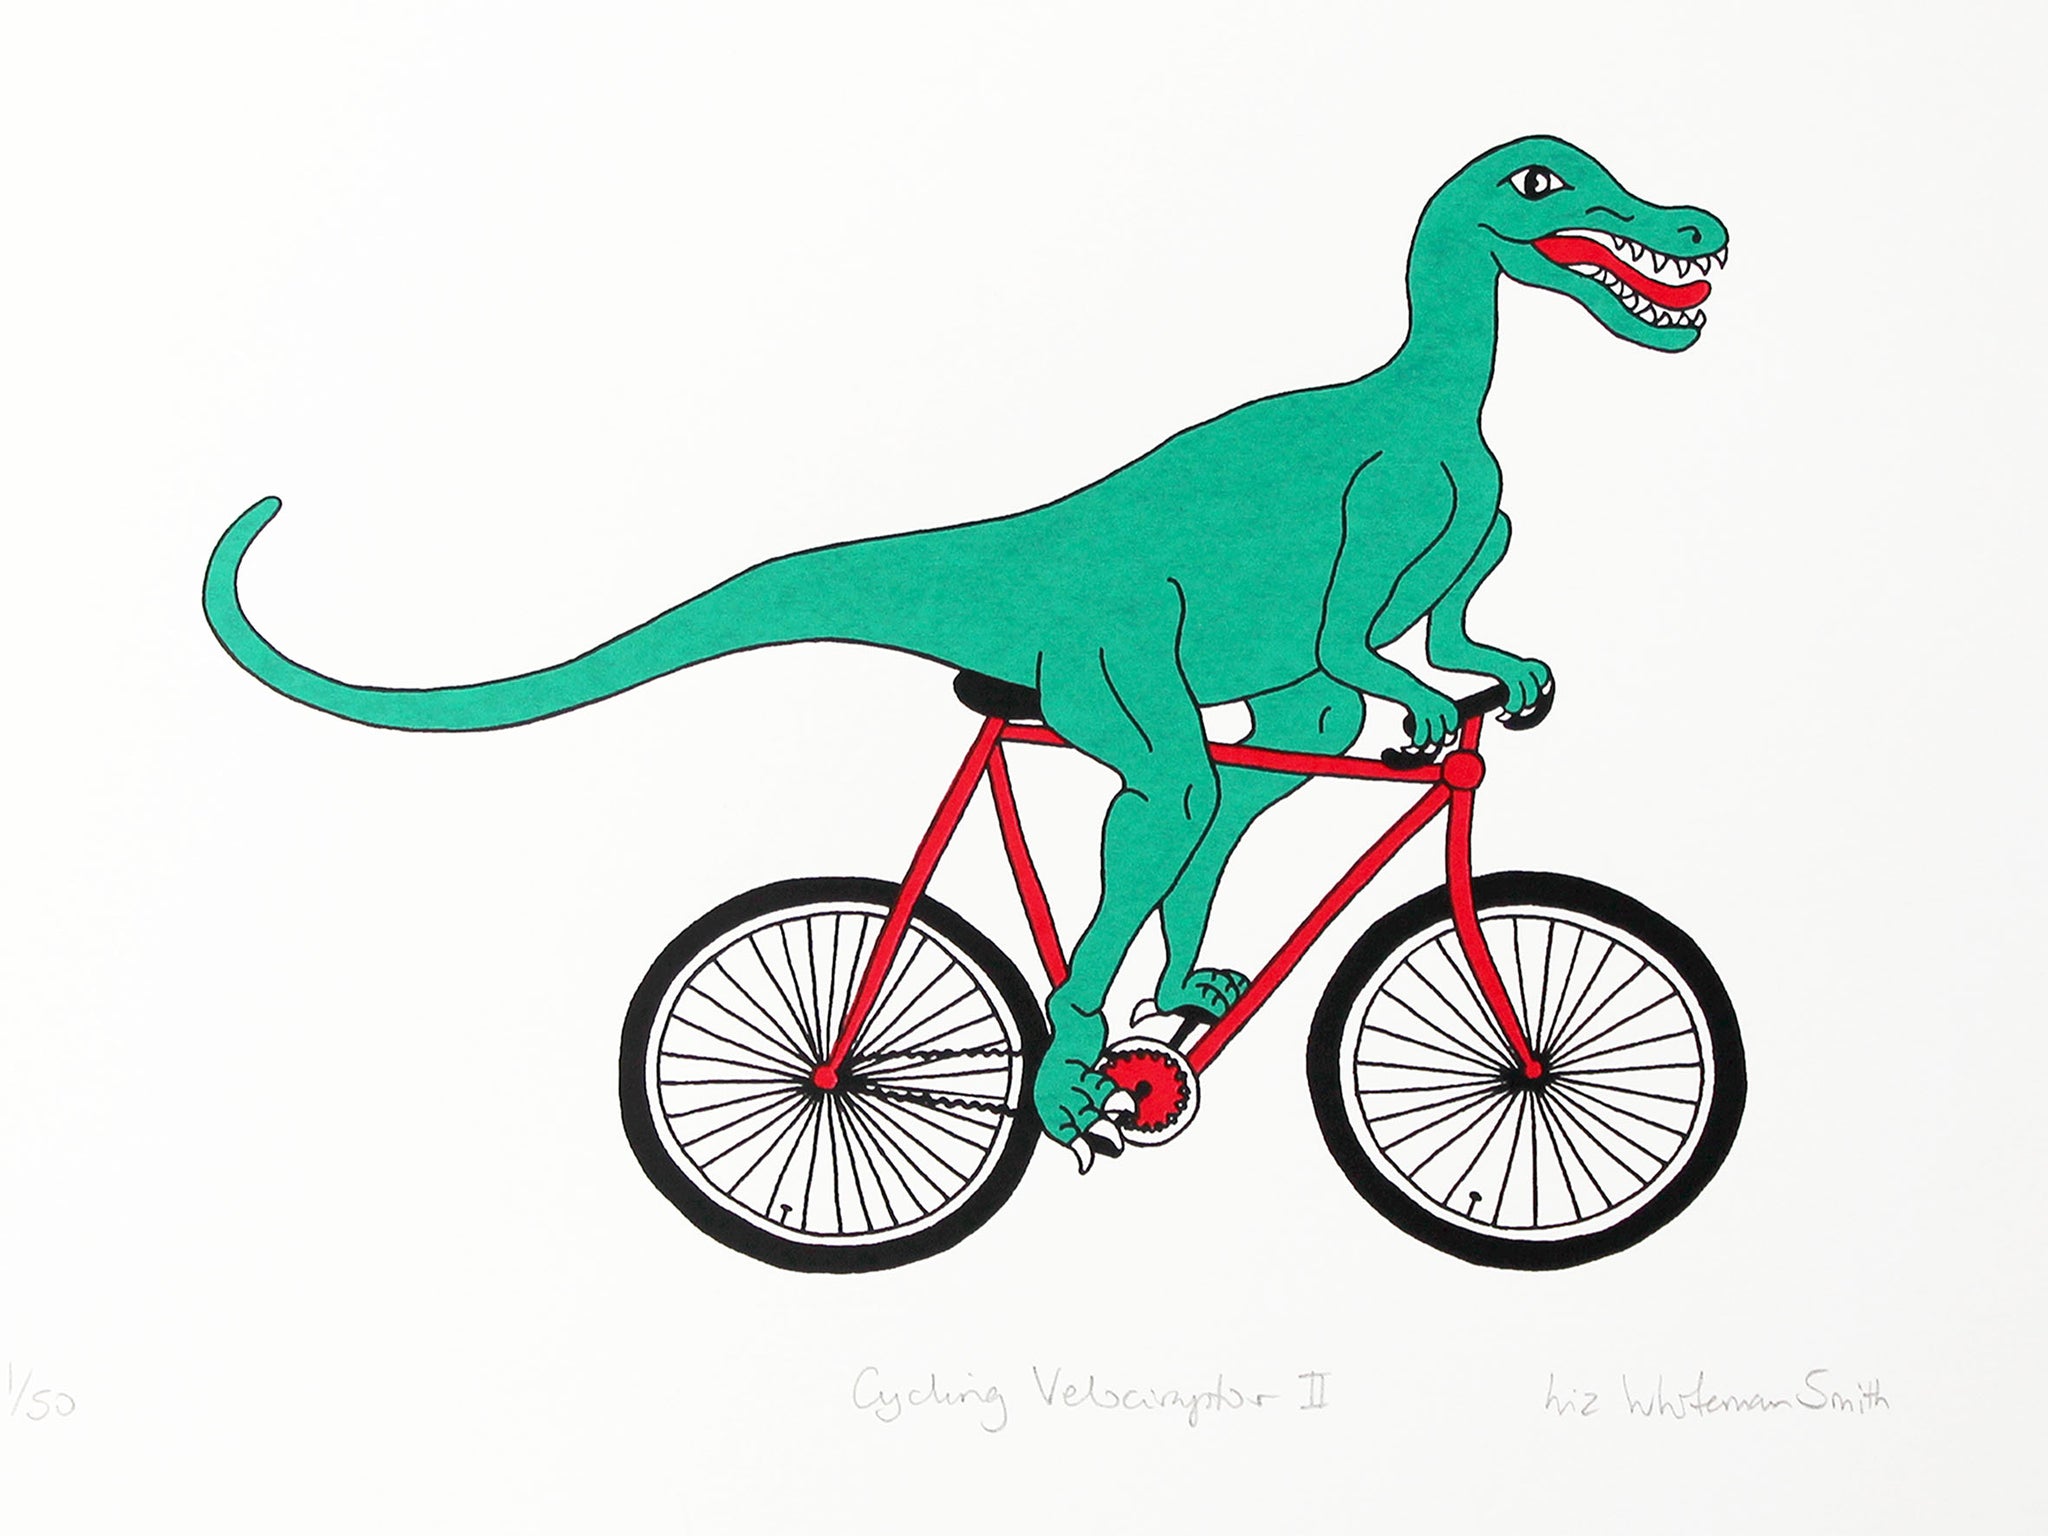 Green velociraptor cycling along happily on a red bicycle